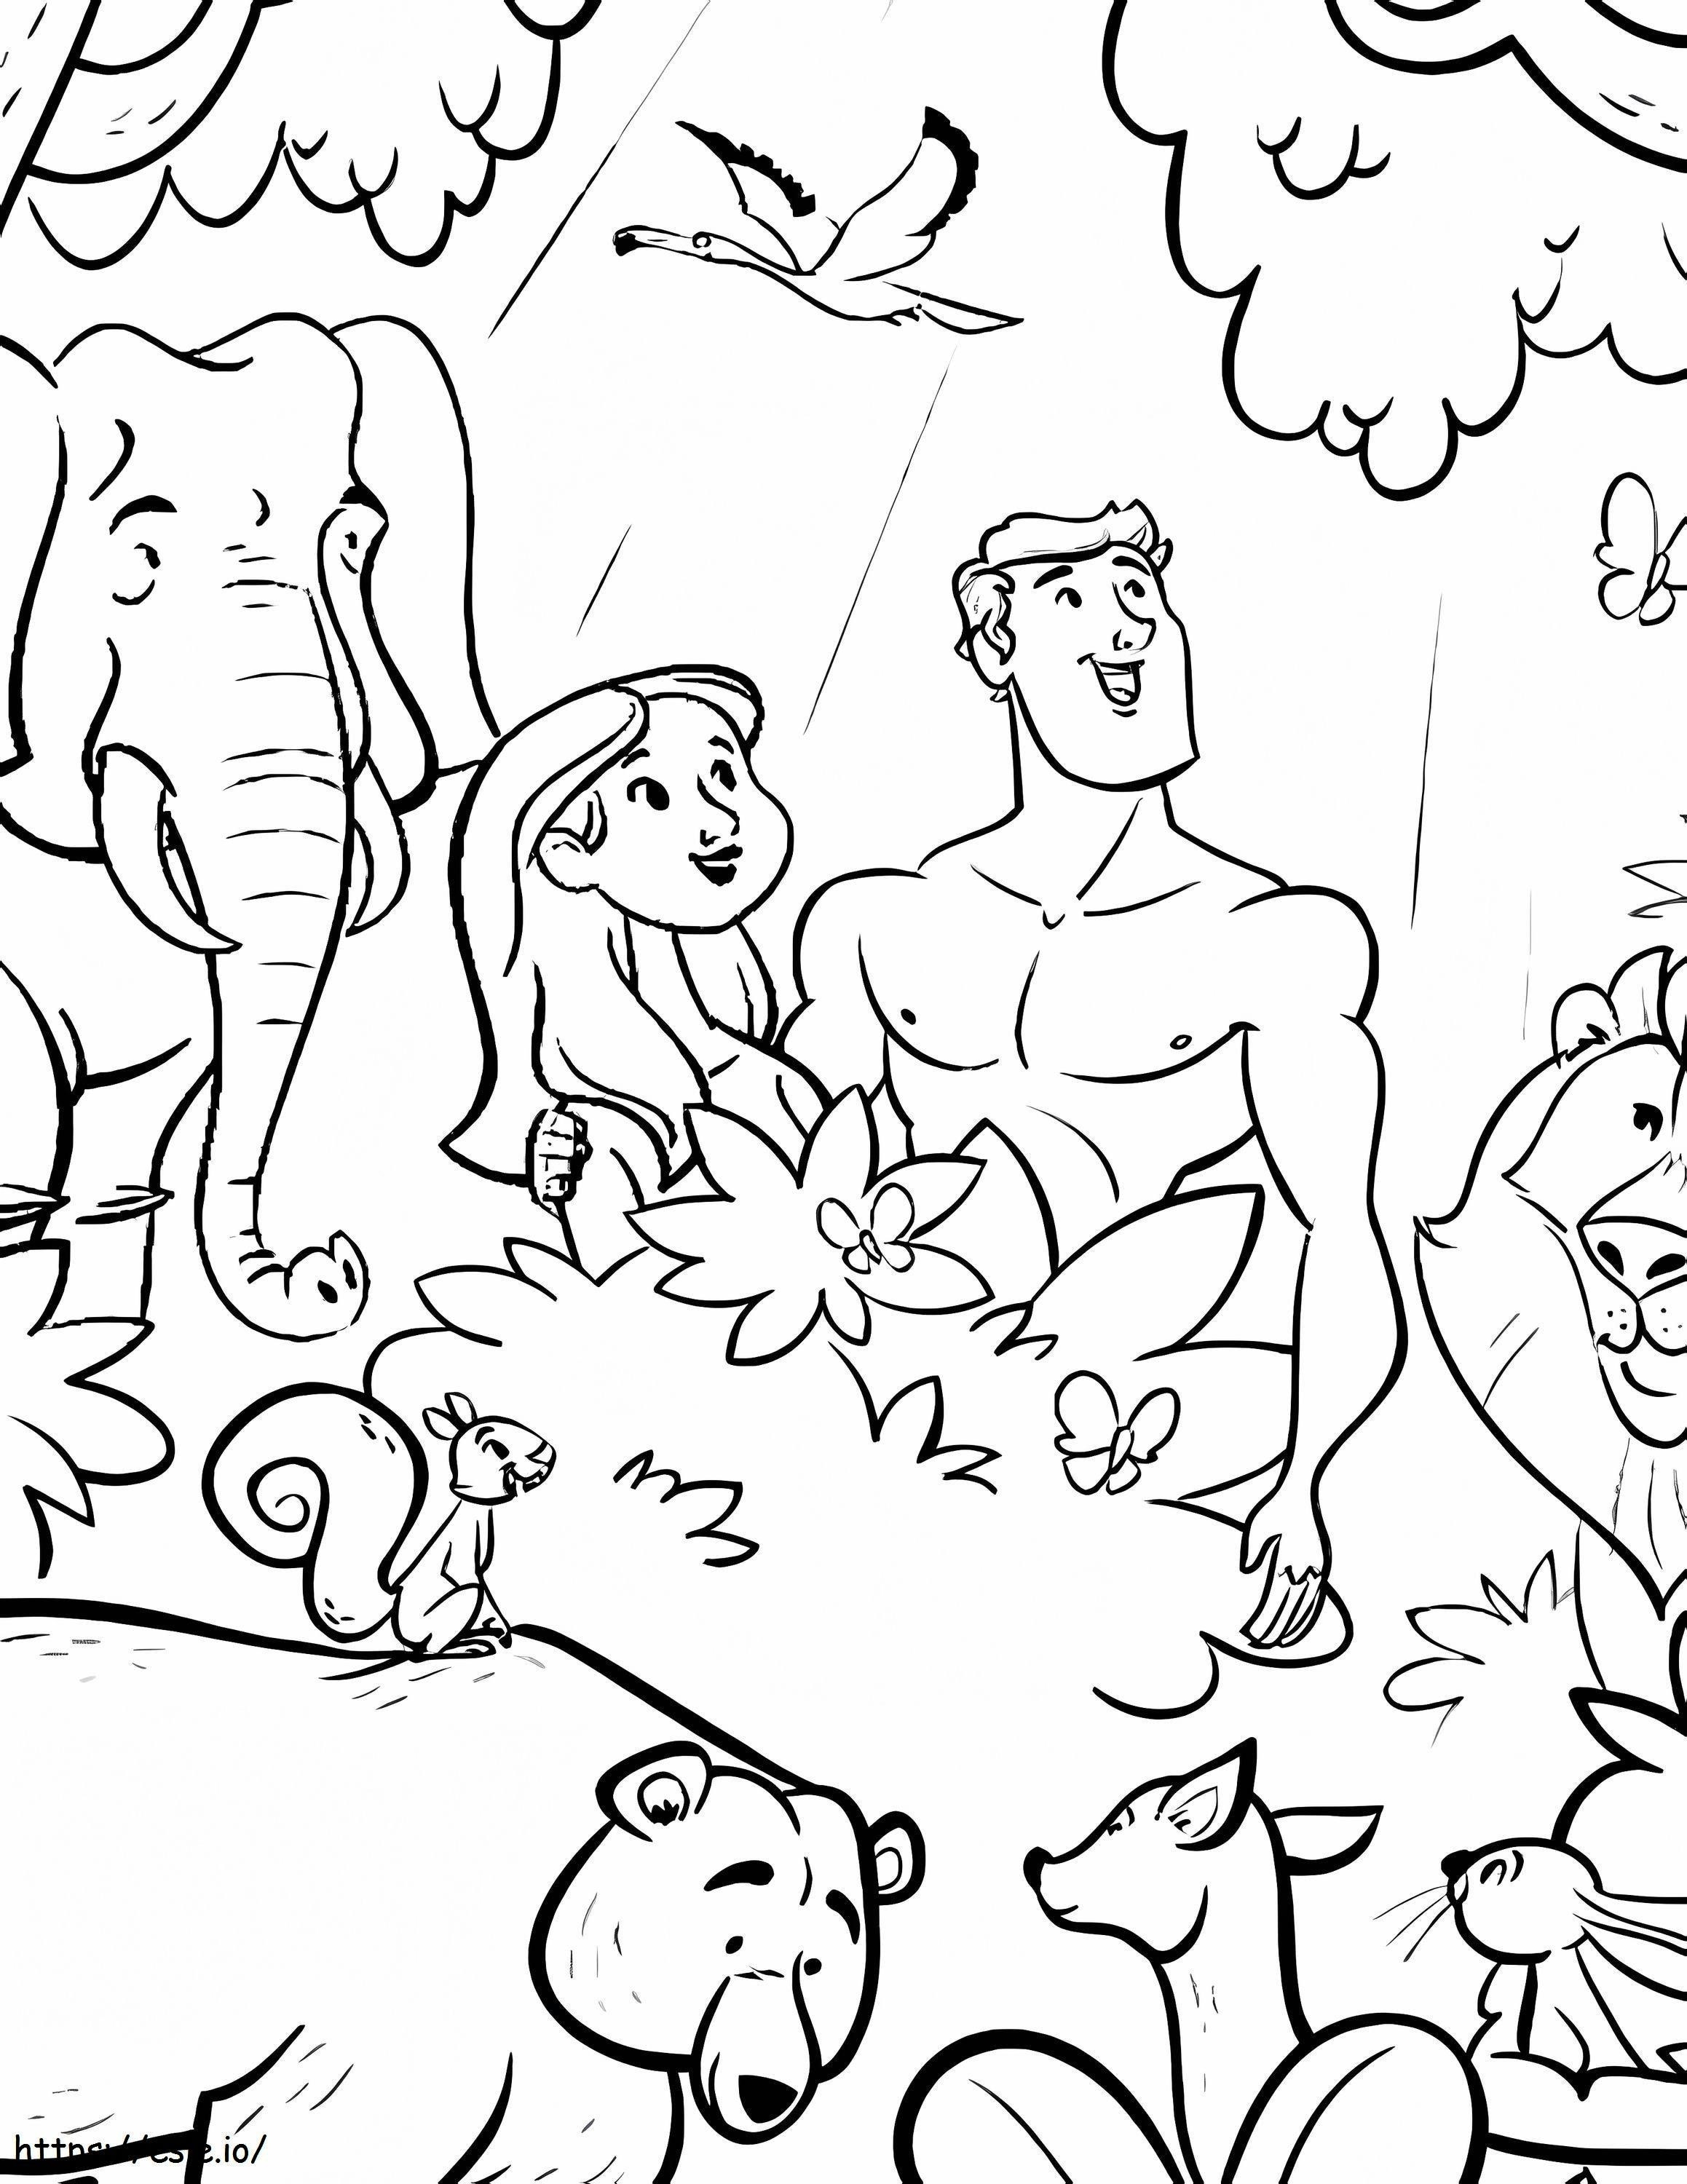 Adam And Eve 2 coloring page